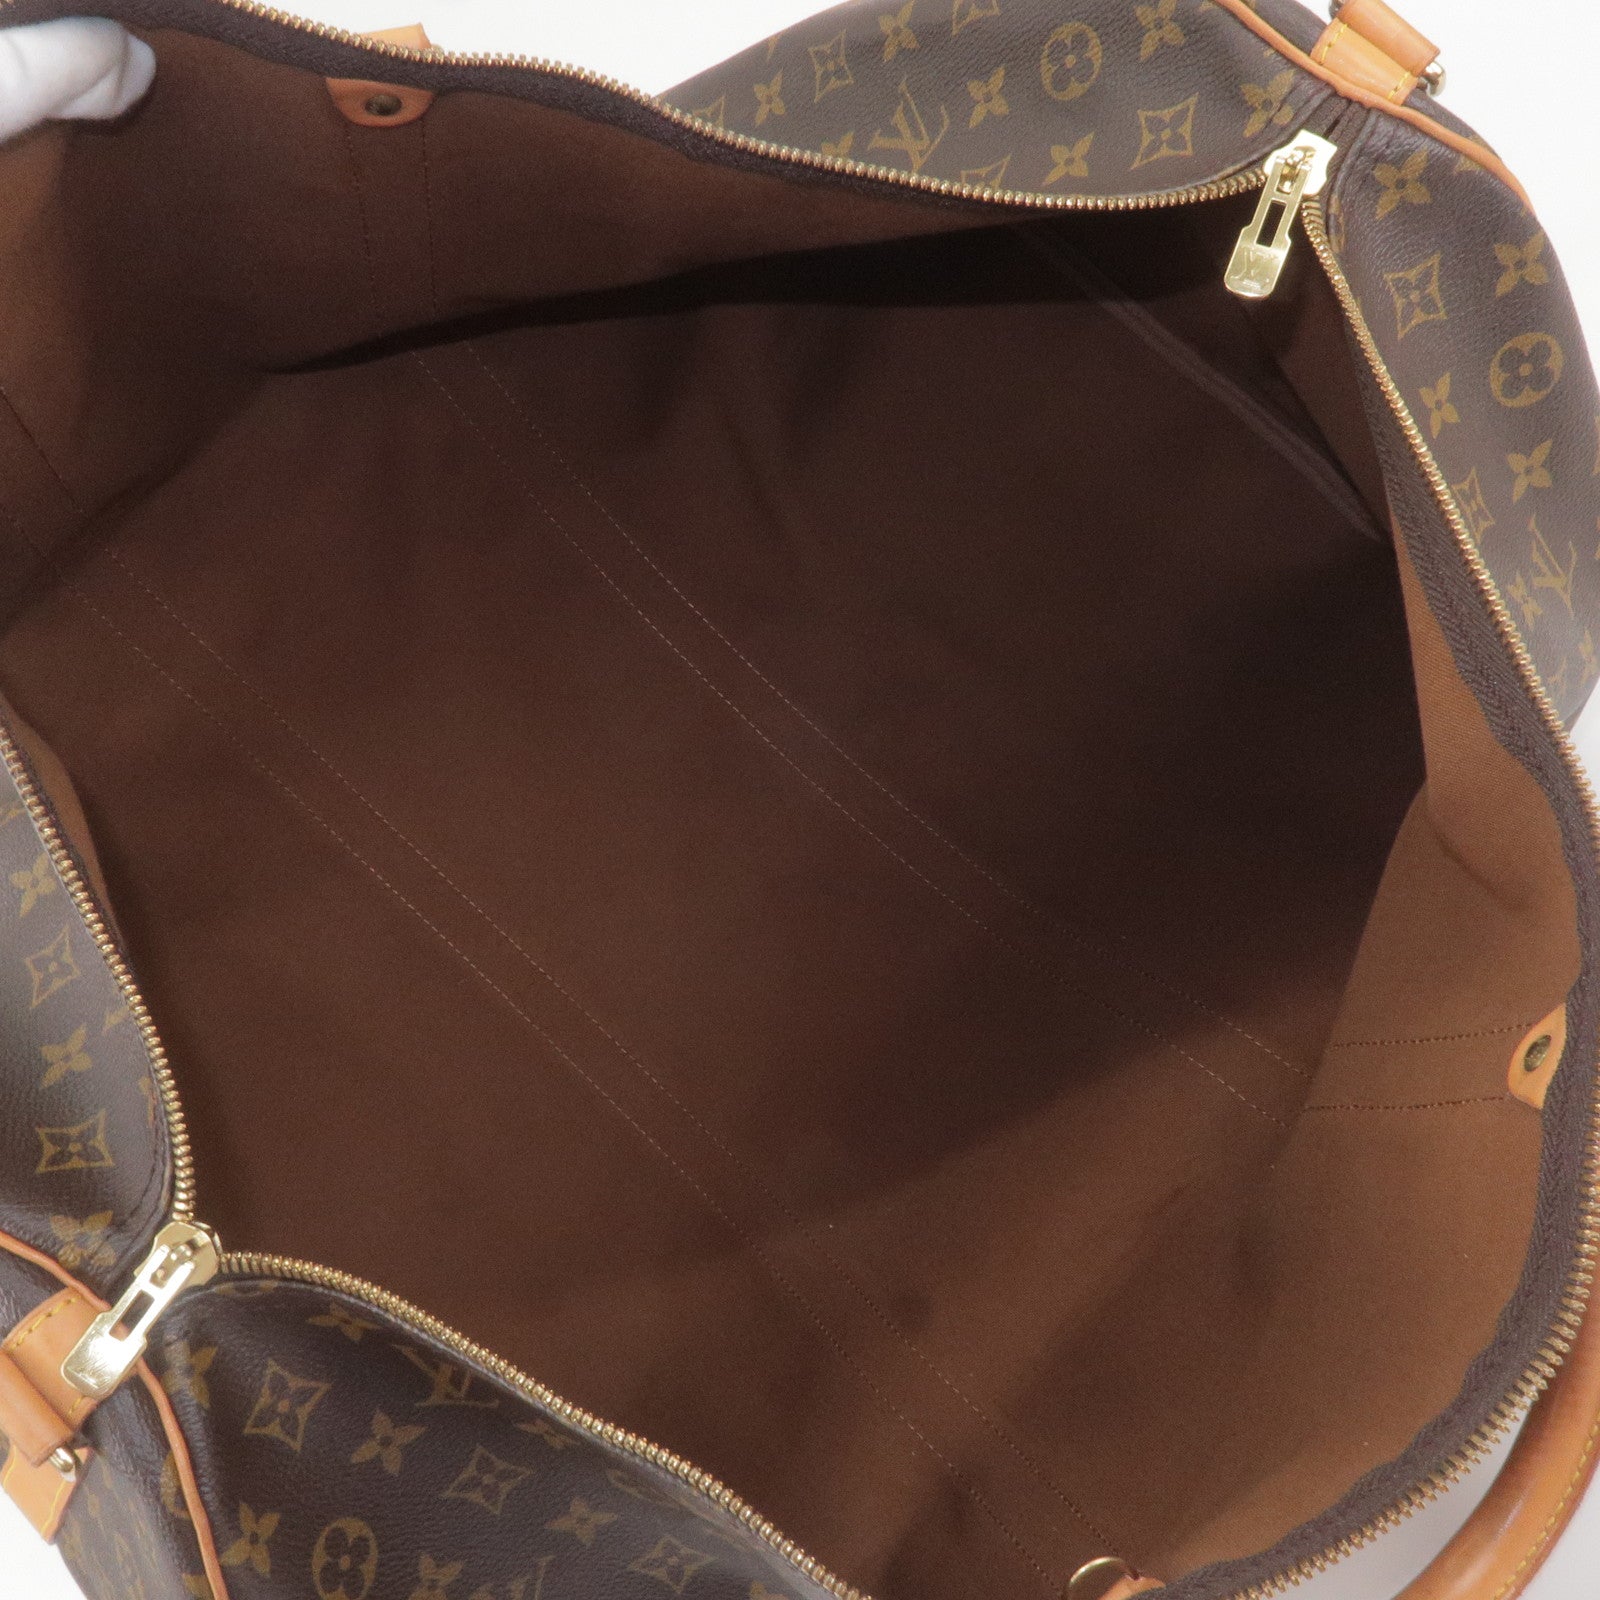 Louis Vuitton Black Empreinte Sully PM - Handbag | Pre-owned & Certified | used Second Hand | Unisex